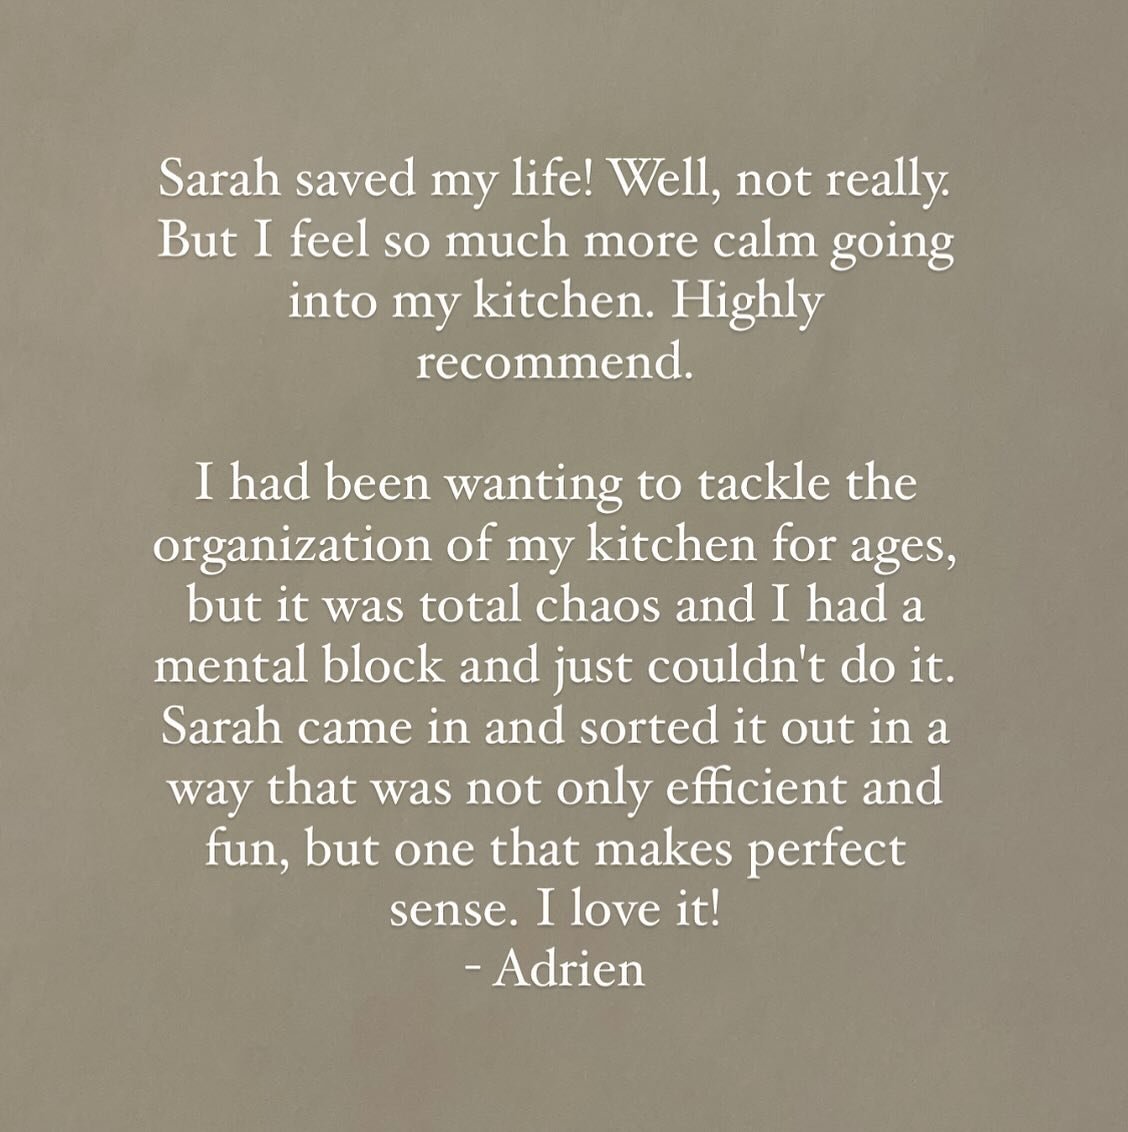 Thank you for the review Adrien! I love my job!!